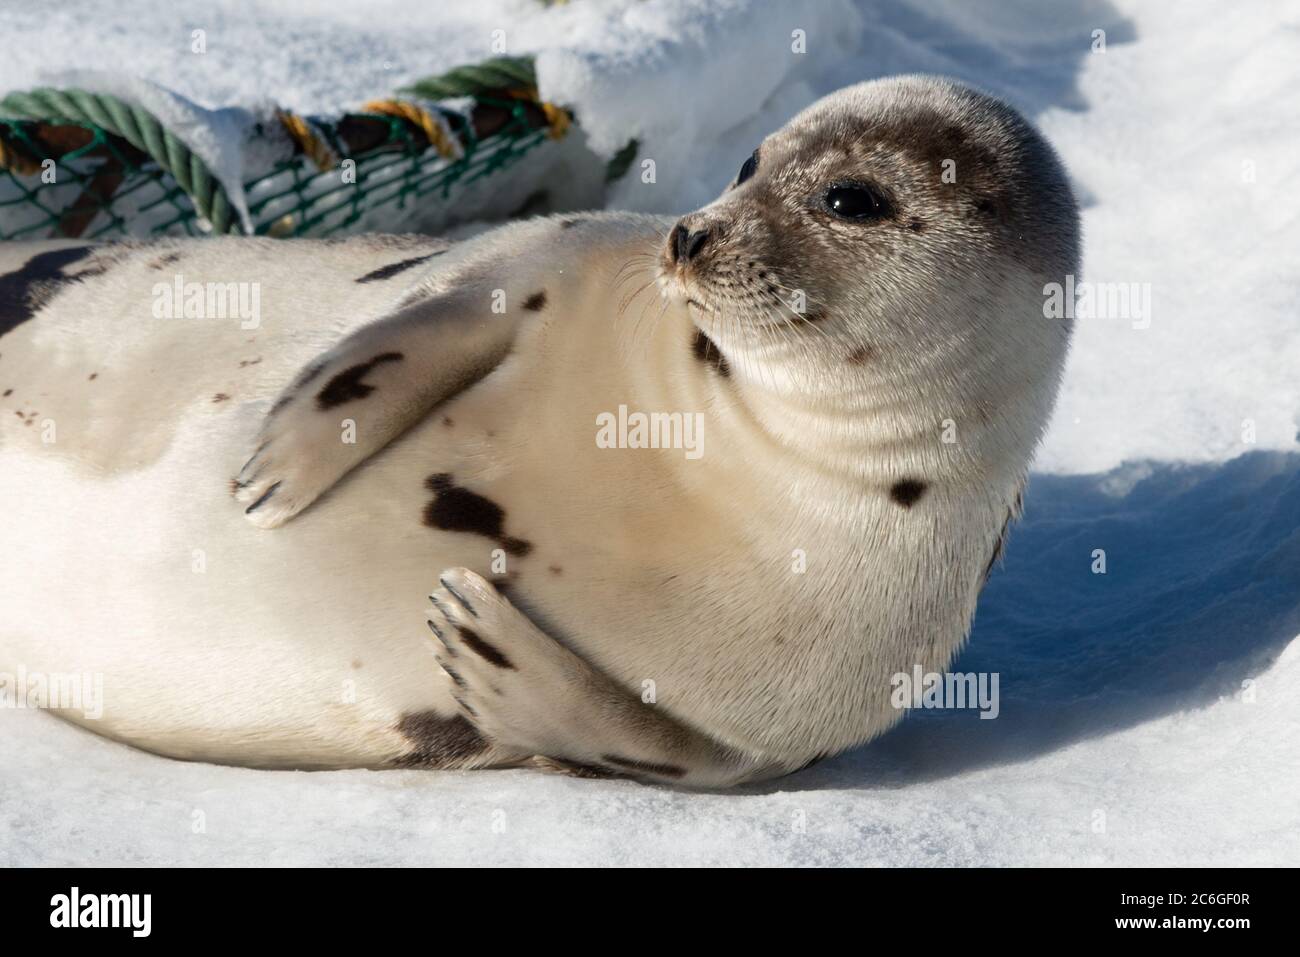 A large harp seal moving along on top of ice and snow.  You can see its long flippers and sharp claws. Stock Photo